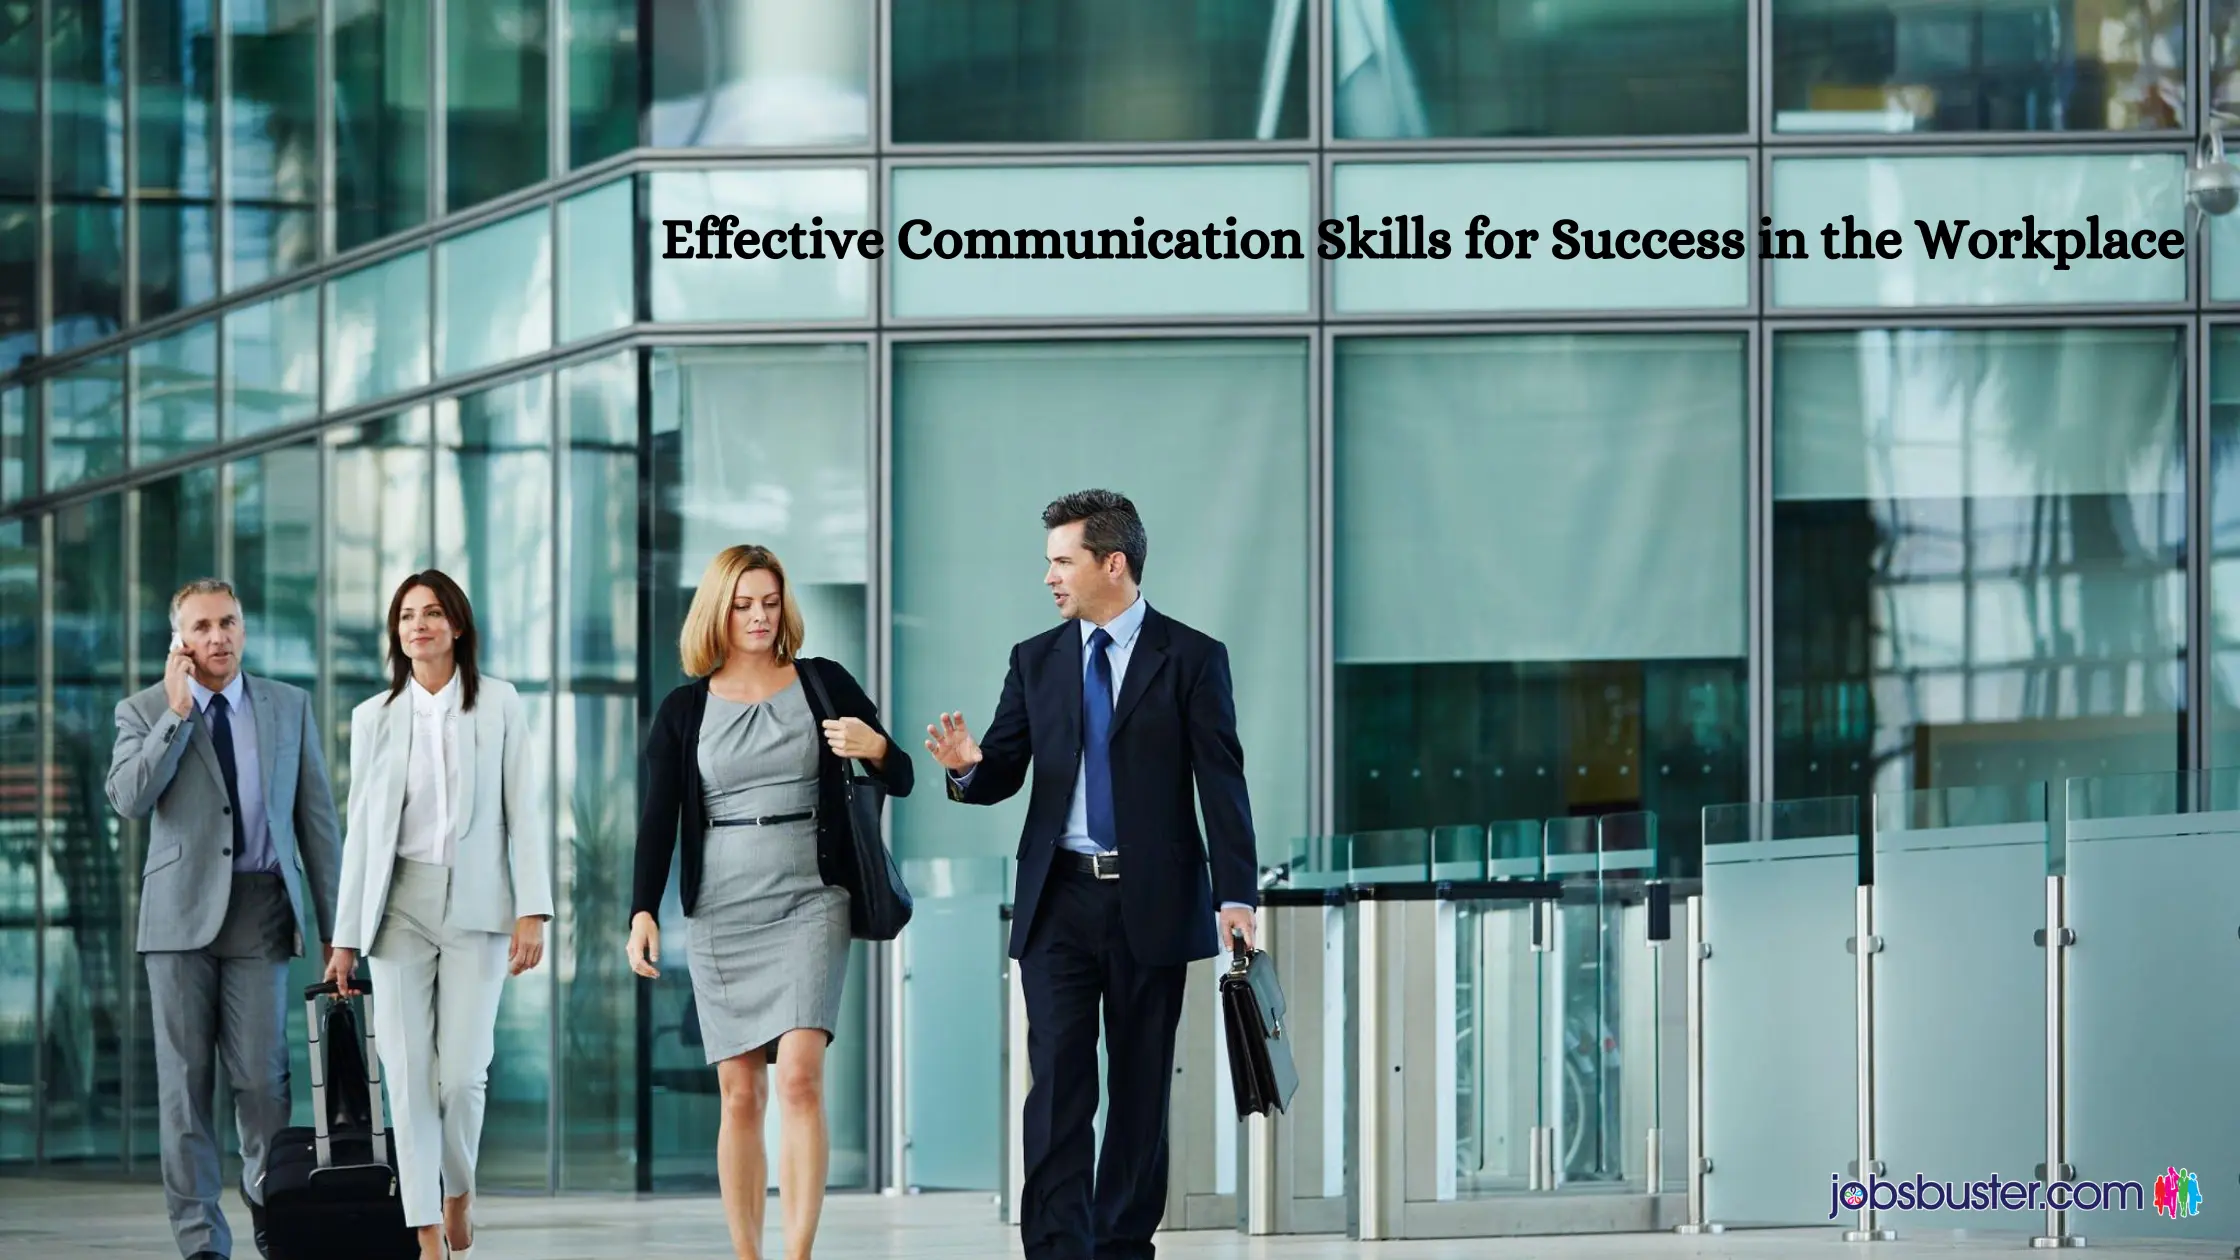 Effective Communication Skills for Success in the Workplace